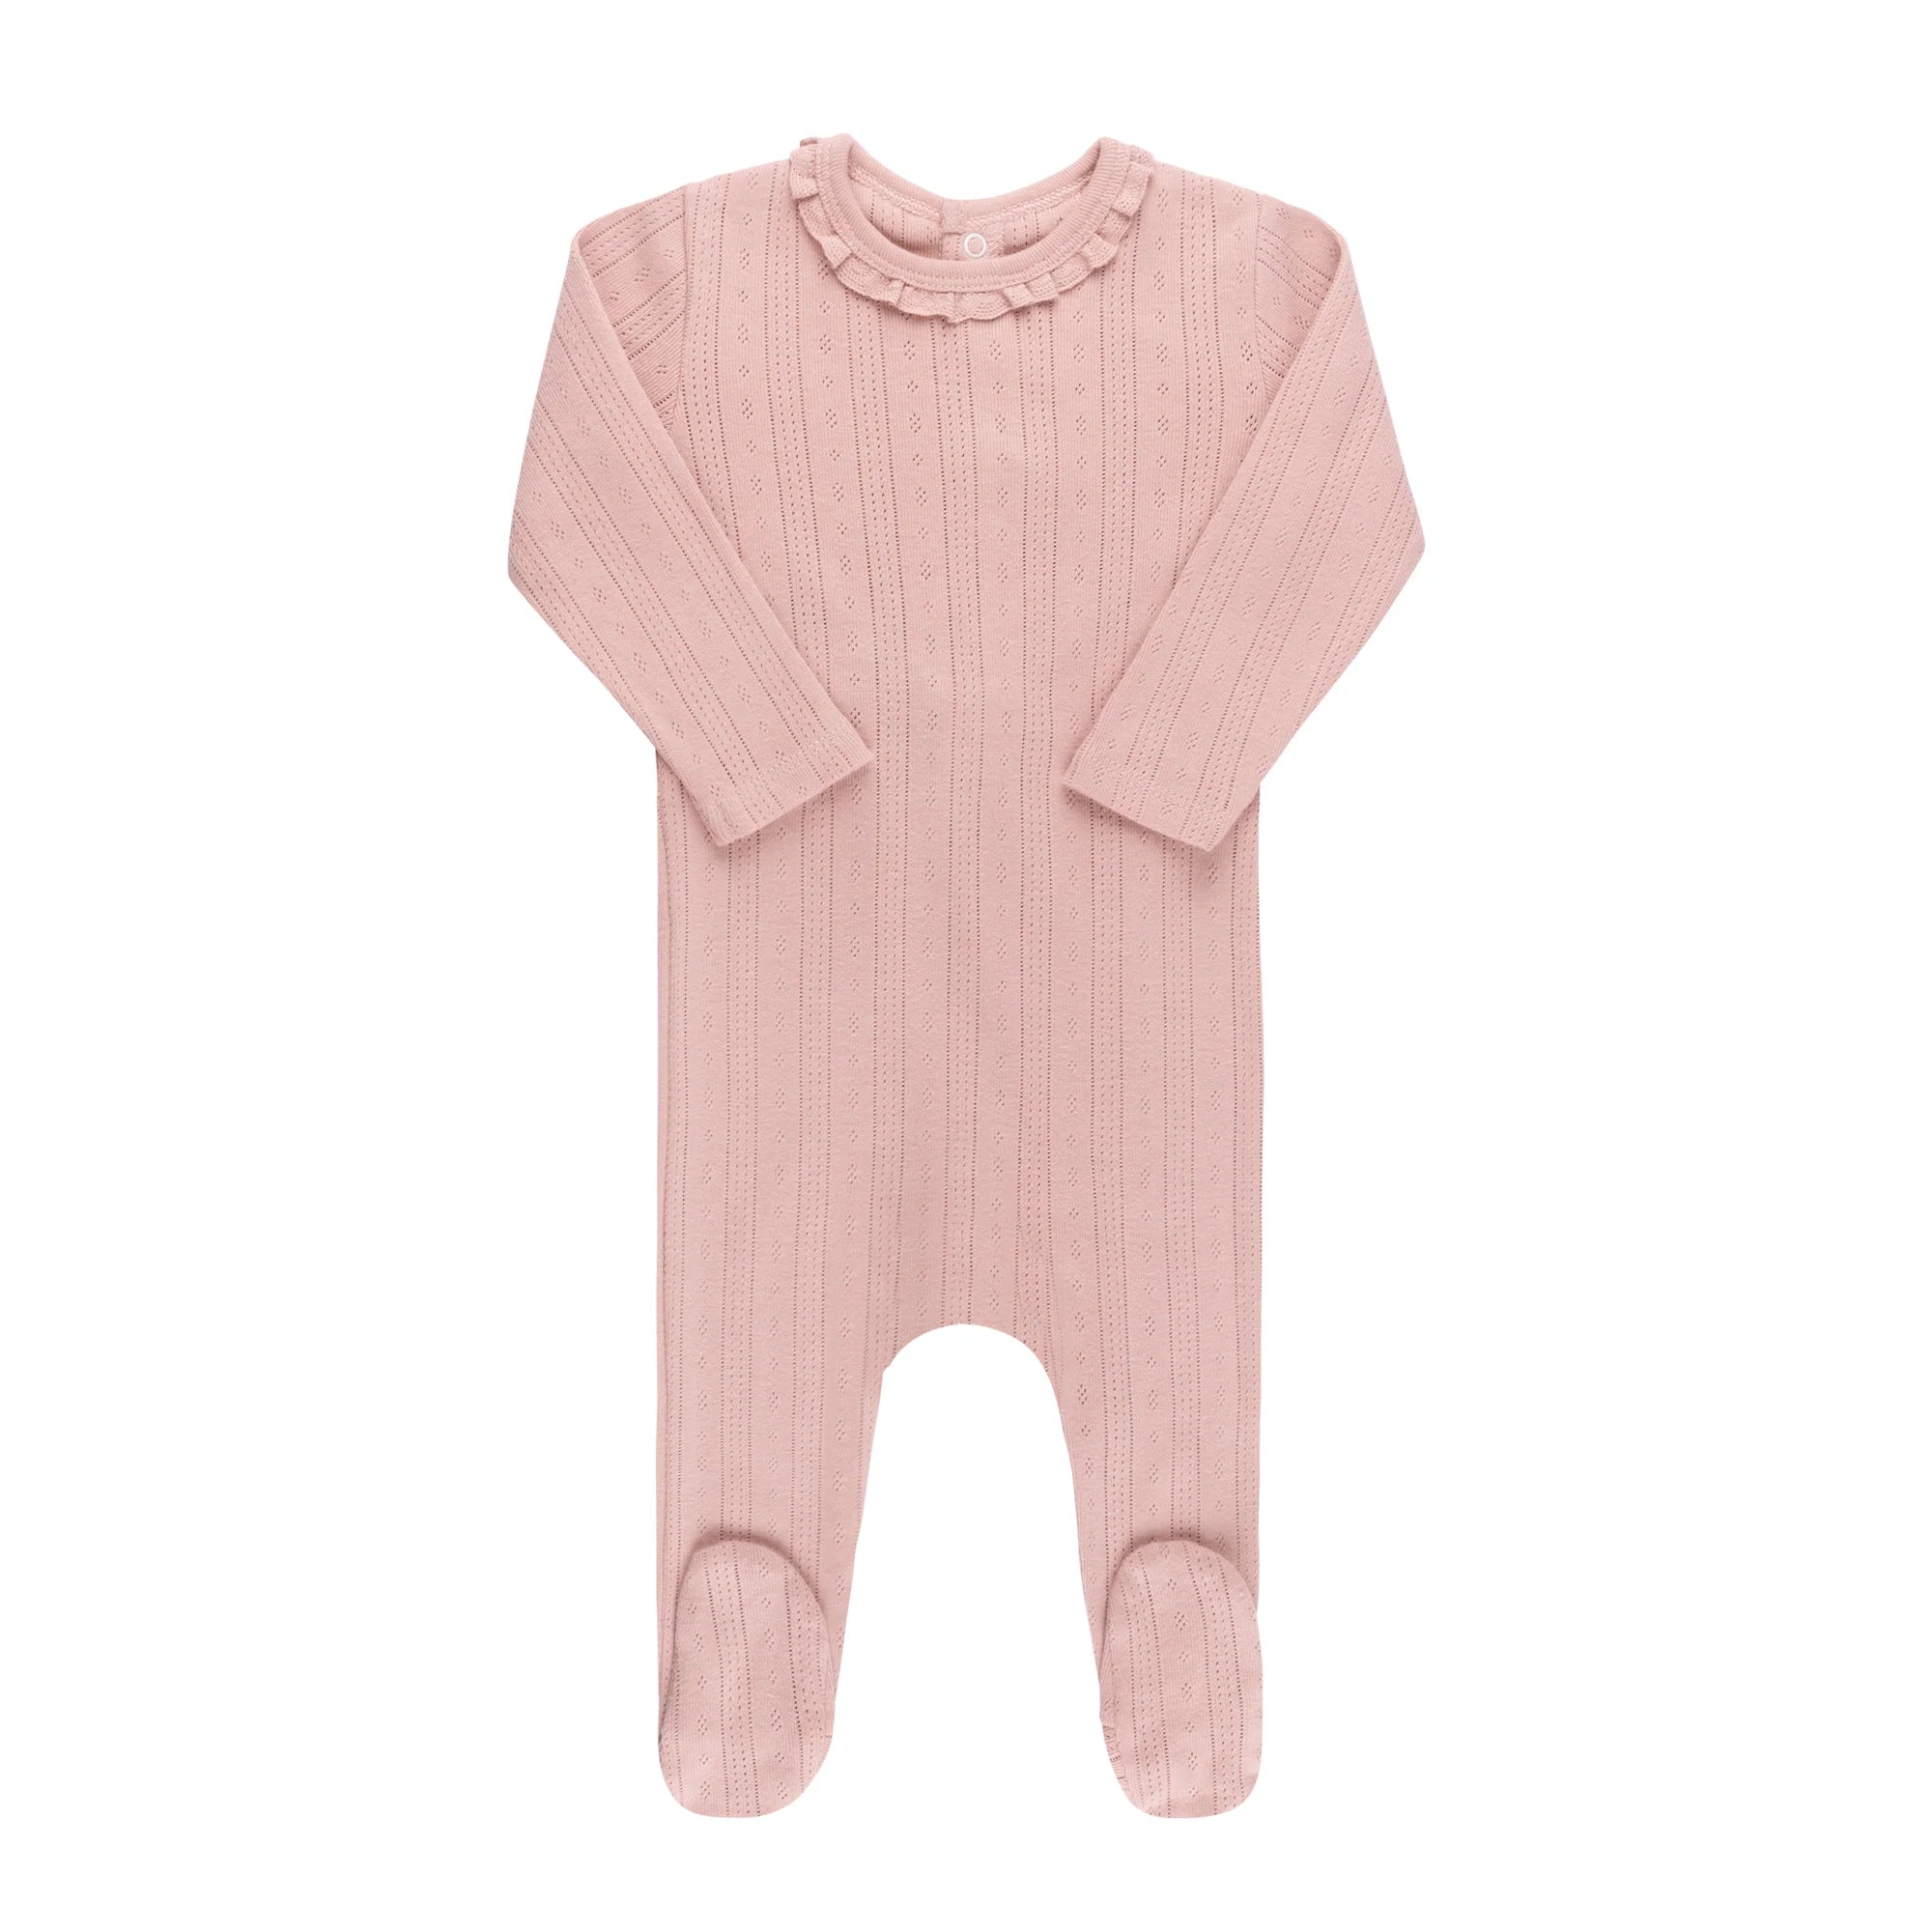 Ely's & Co Lace Trim Pointelle Collection- Pink-Footie